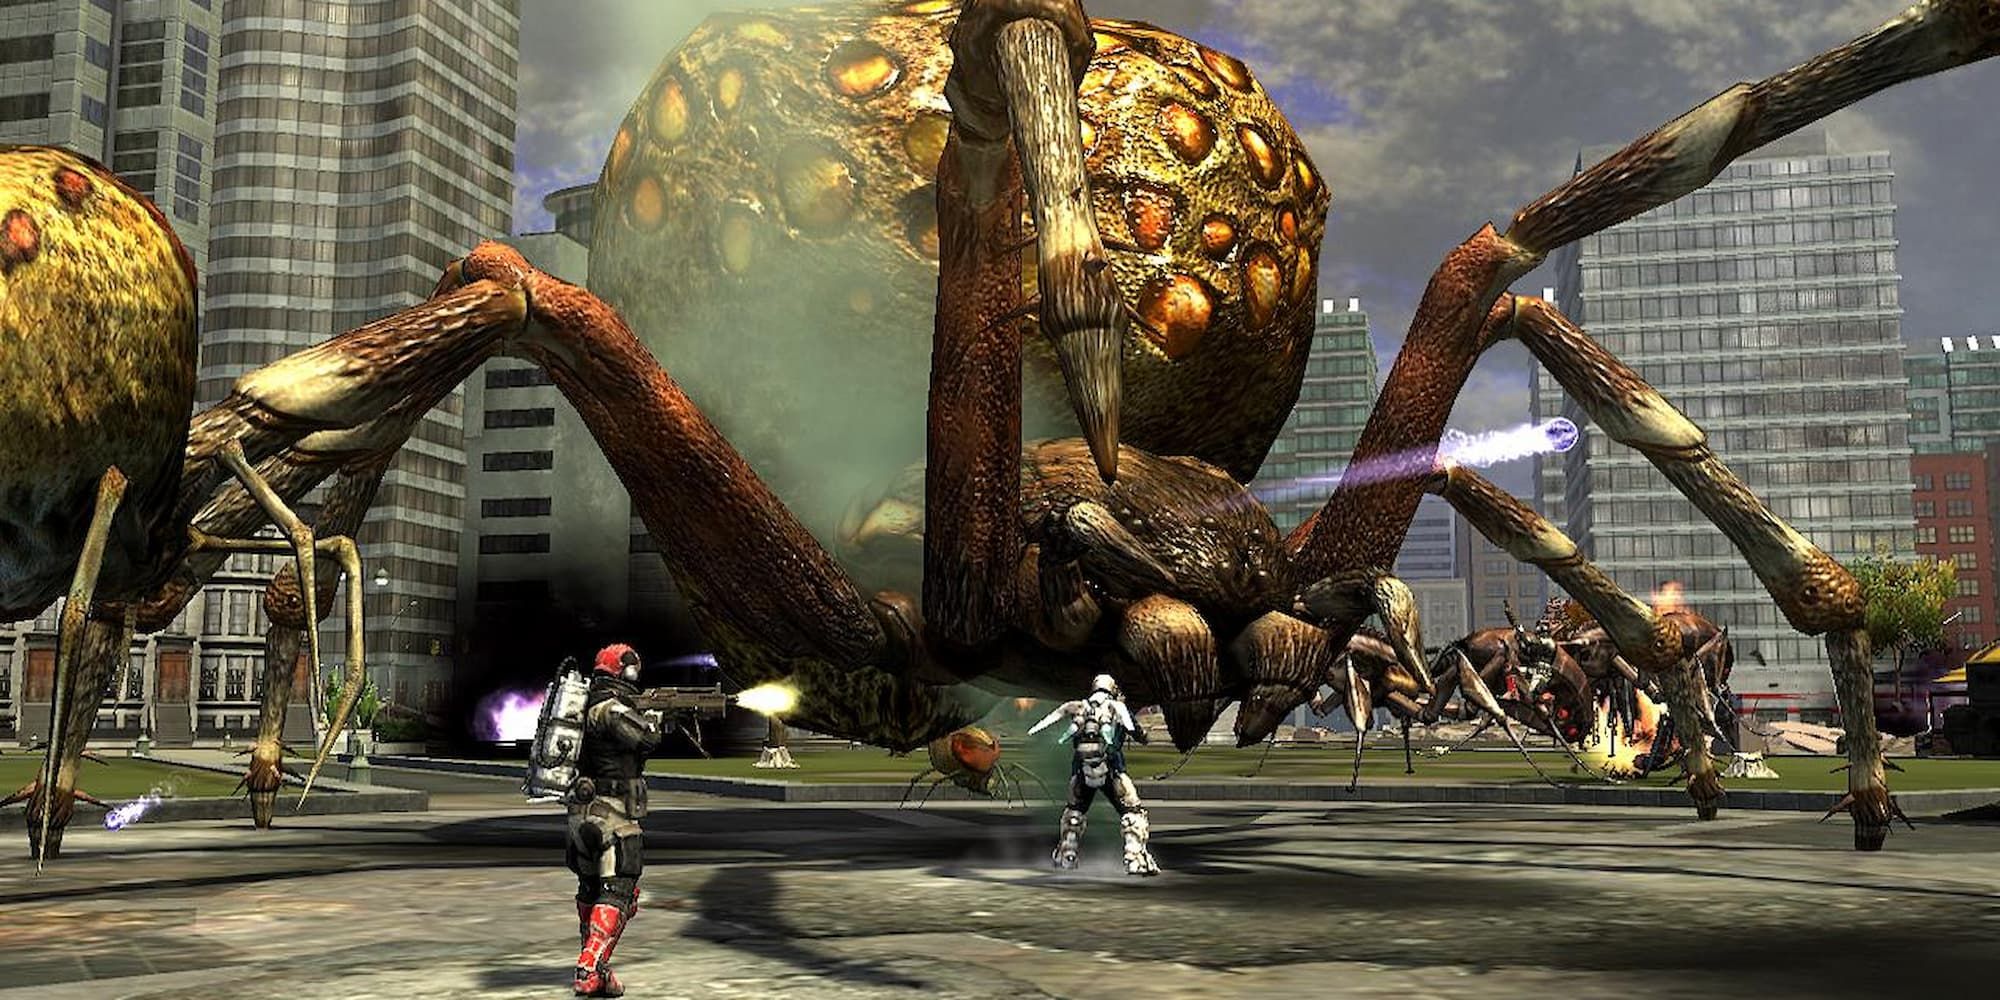 Earth Defense Force soldiers battle giant spiders in Earth Defense Force: Insect Armageddon.